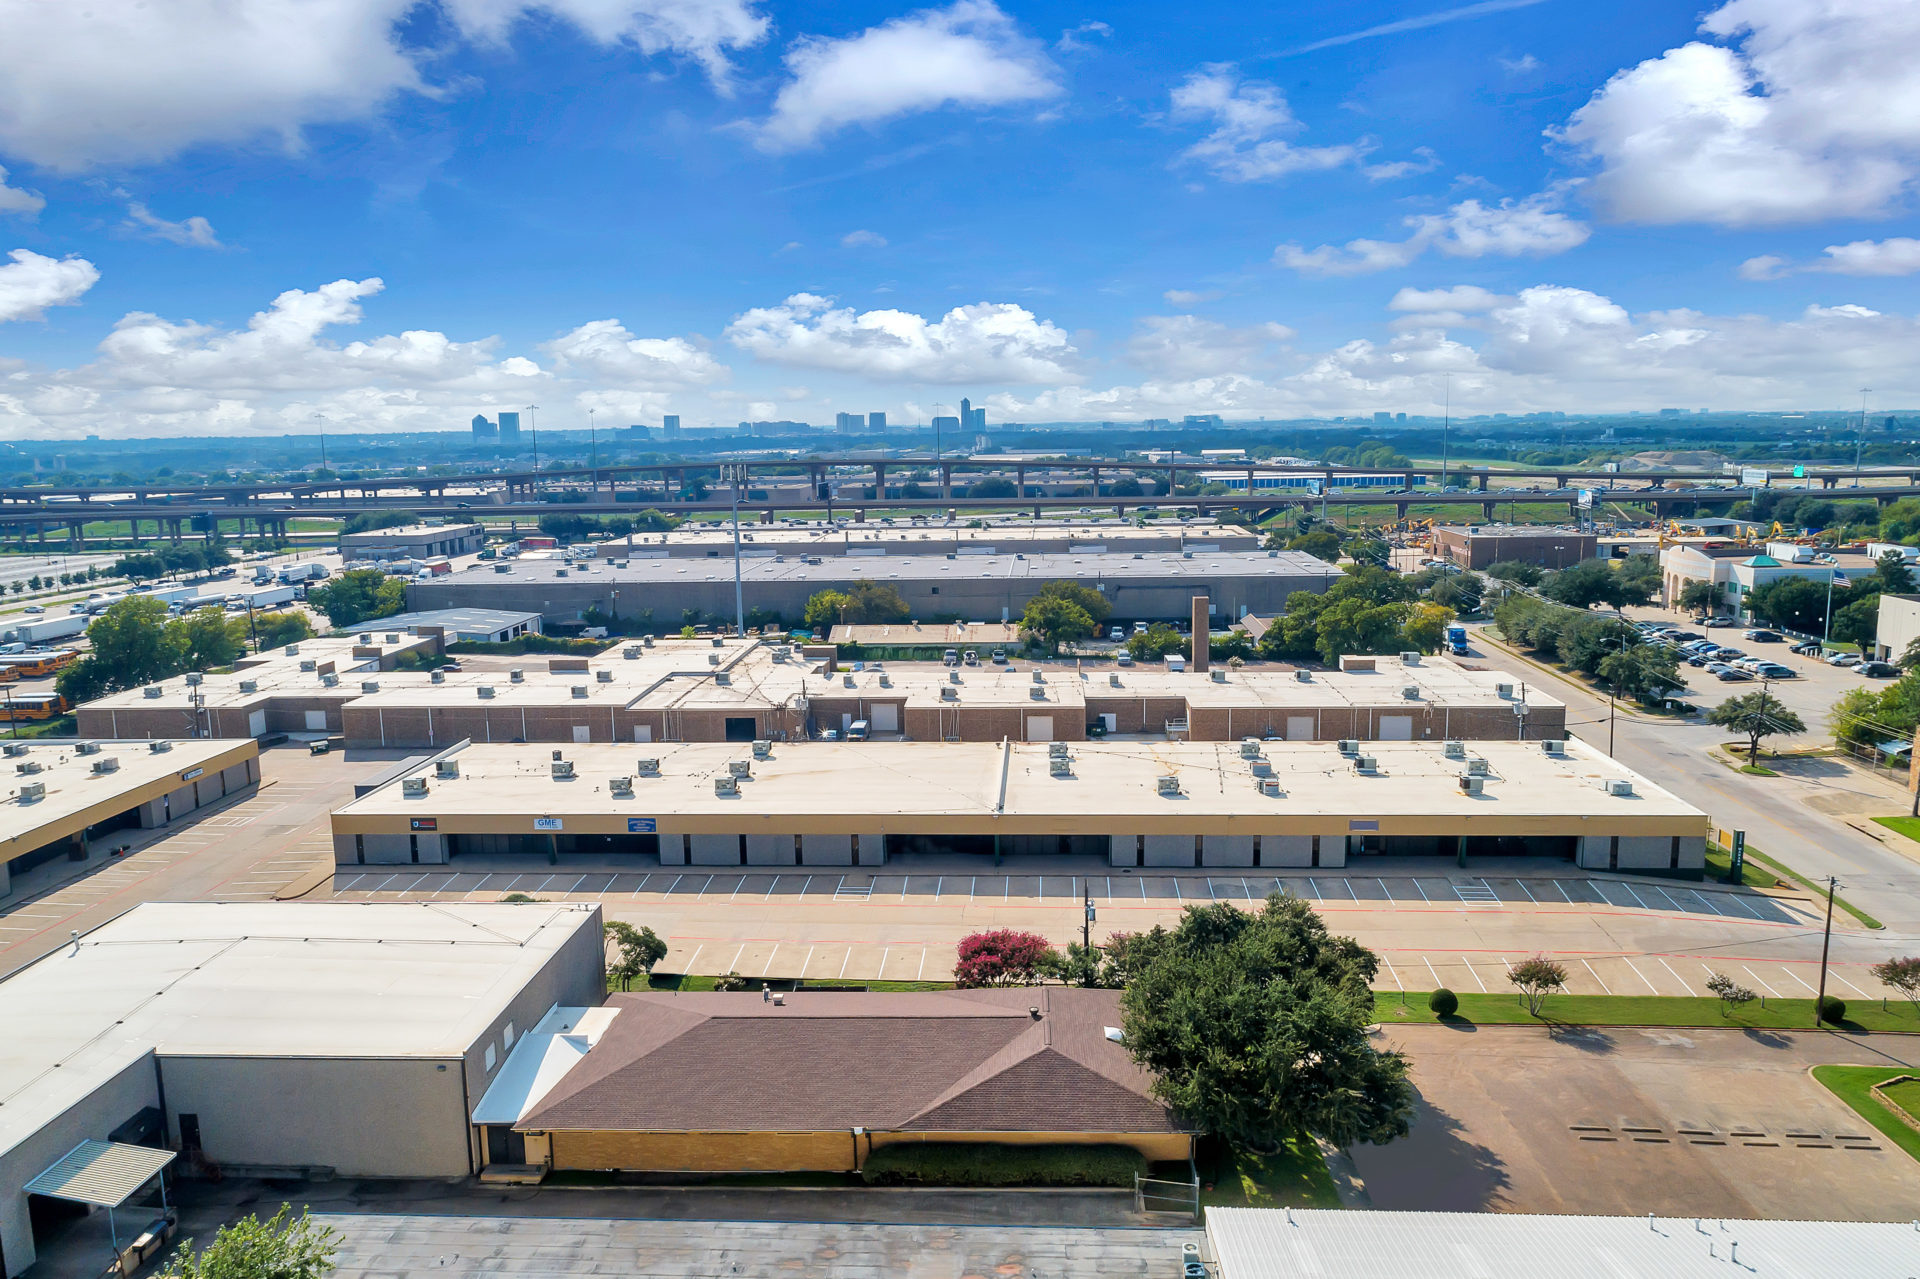 Aerial view of multiple large, warehouse buildings with parking spaces in front and views of the city in the background